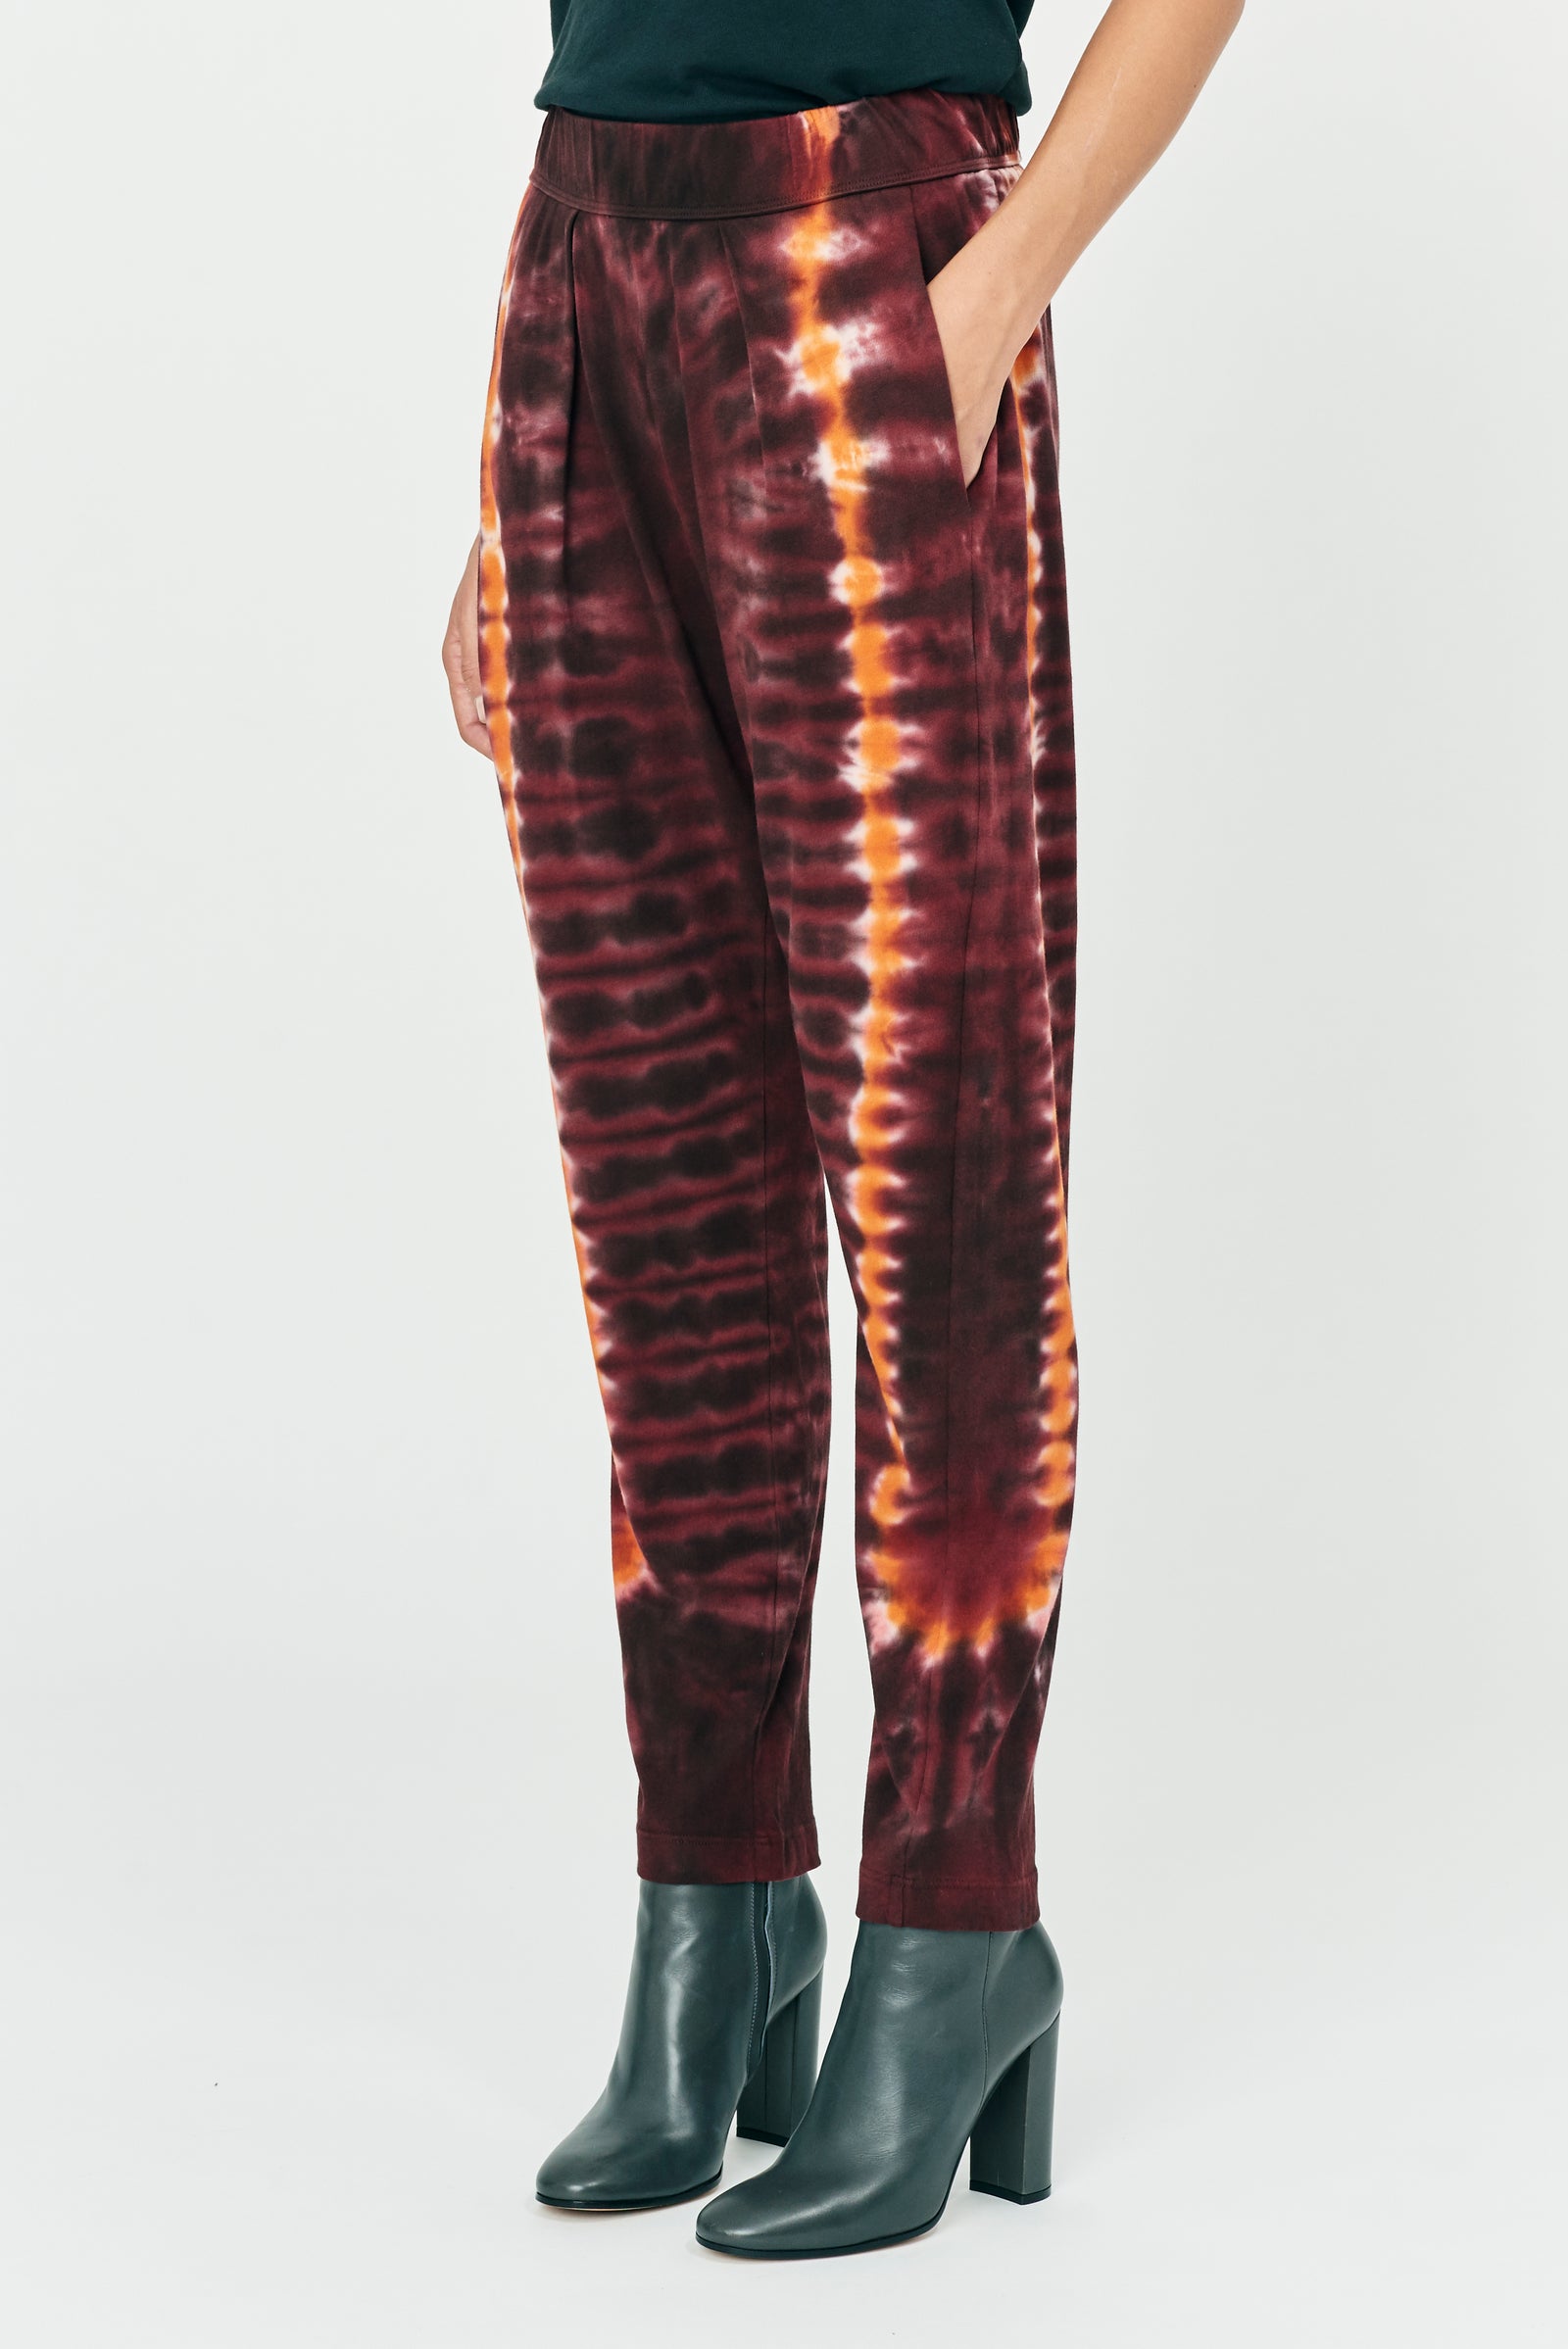 Red Hills Tie Dye Classic Jersey Easy Pant Full Side View 